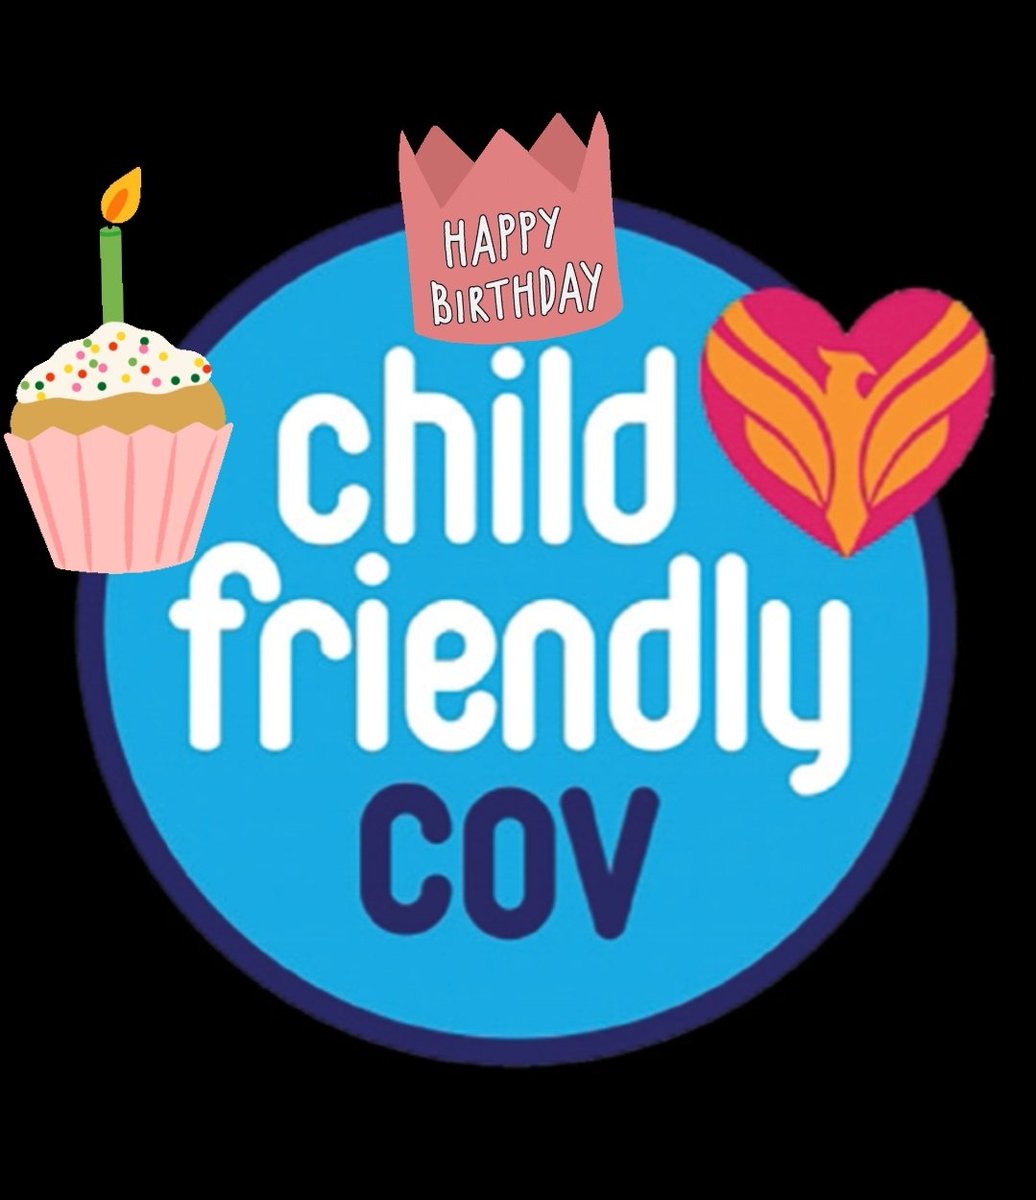 HaPpY 1st Birthday Child Friendly Cov! 
It's been a busy year!! 
#watchthisspace #coventrycitycouncil #westmidlandspolice #coventryuniversity 
#positiveyouthfoundation  #mcdonalds #cvlife #Compass #eon #etchandpin #participationteamcov